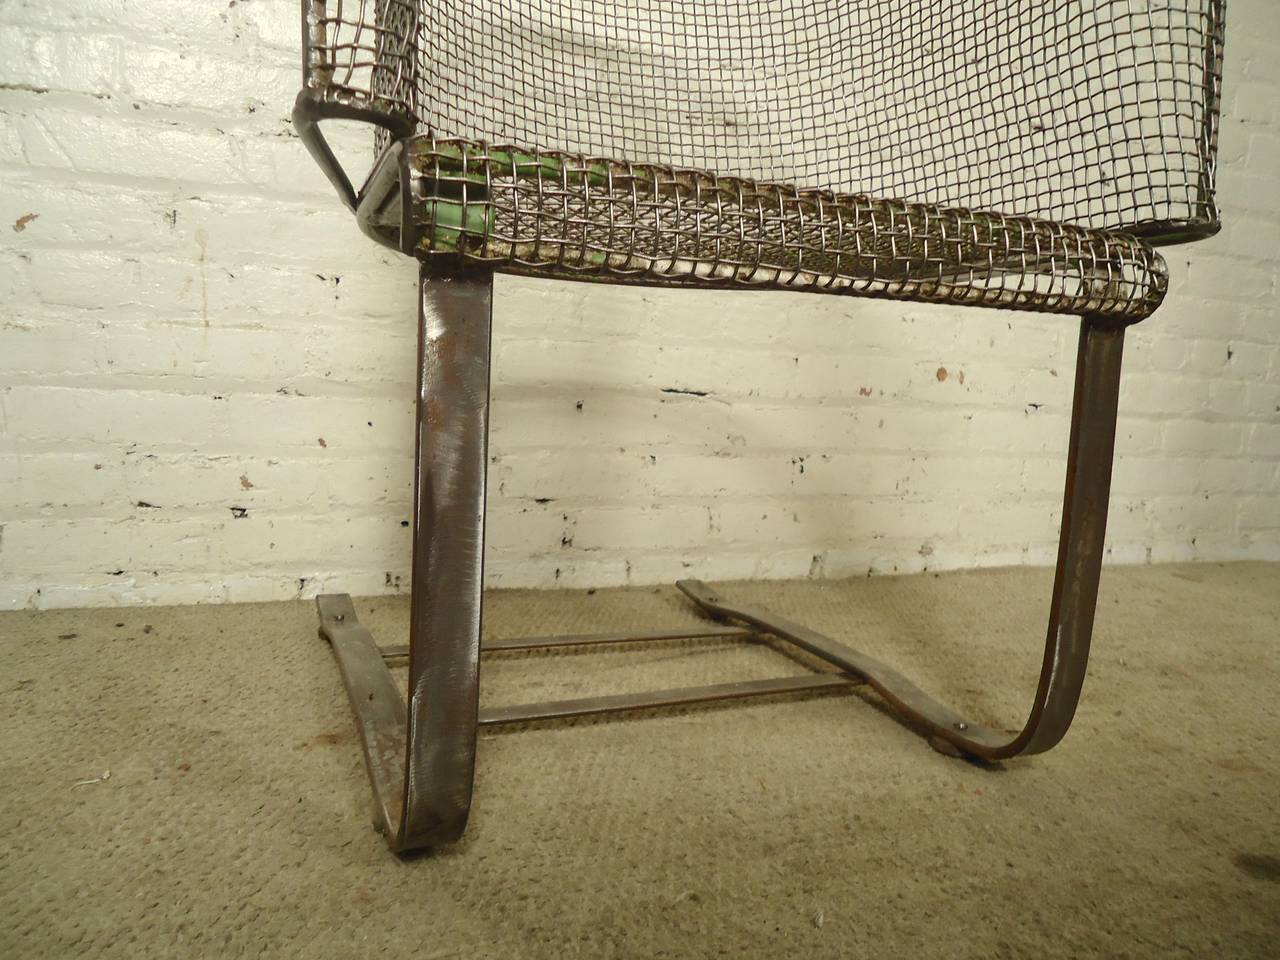 Mid-Century Modern patio chairs in a new bare metal style finish. Attractive barrel back with mesh seating, spring metal base for comfortable rocking feeling.

(Please confirm item location-NY or NJ with dealer).